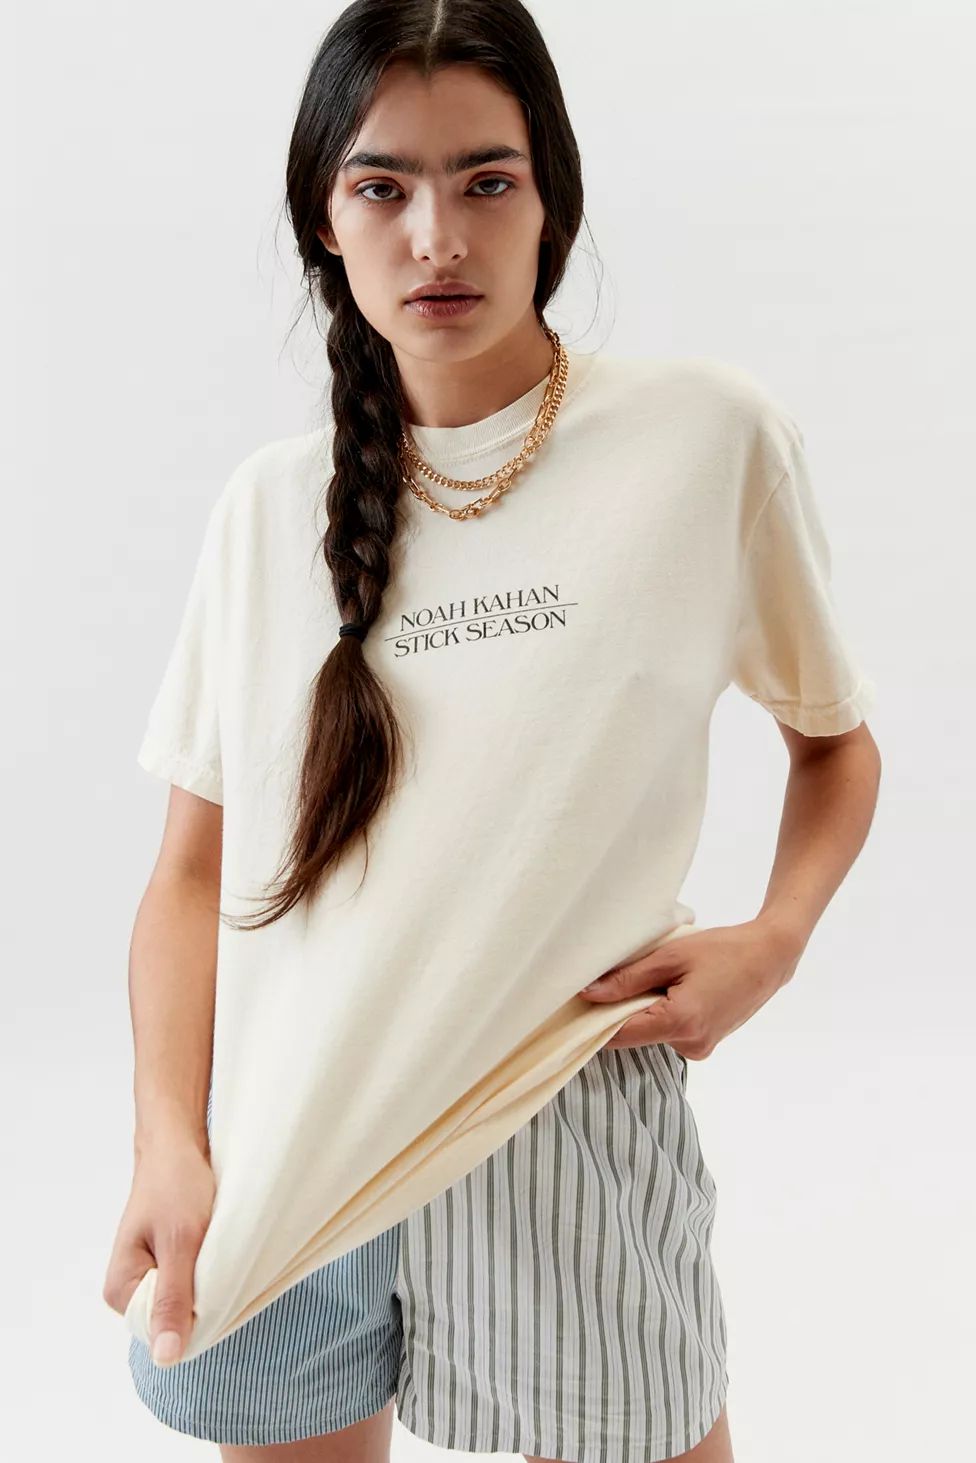 Noah Kahan UO Exclusive Graphic Tee | Urban Outfitters (US and RoW)